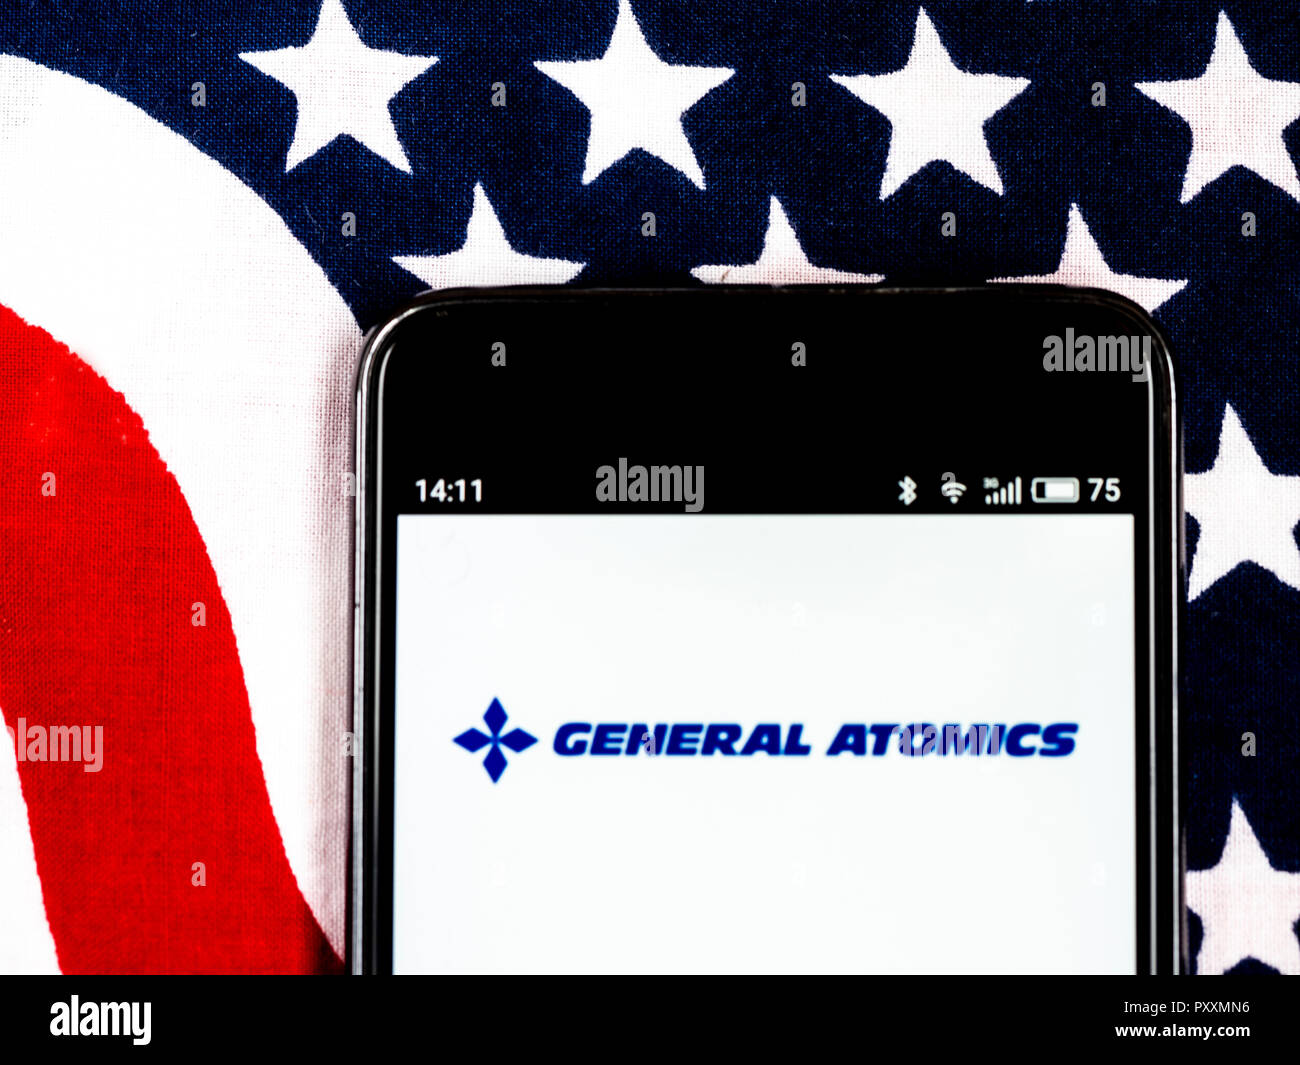 General Atomics Defense contractor company logo seen displayed on smart phone. General Atomics is a defense contractor headquartered in San Diego, California, specializing in nuclear physics including nuclear fission and nuclear fusion. Stock Photo